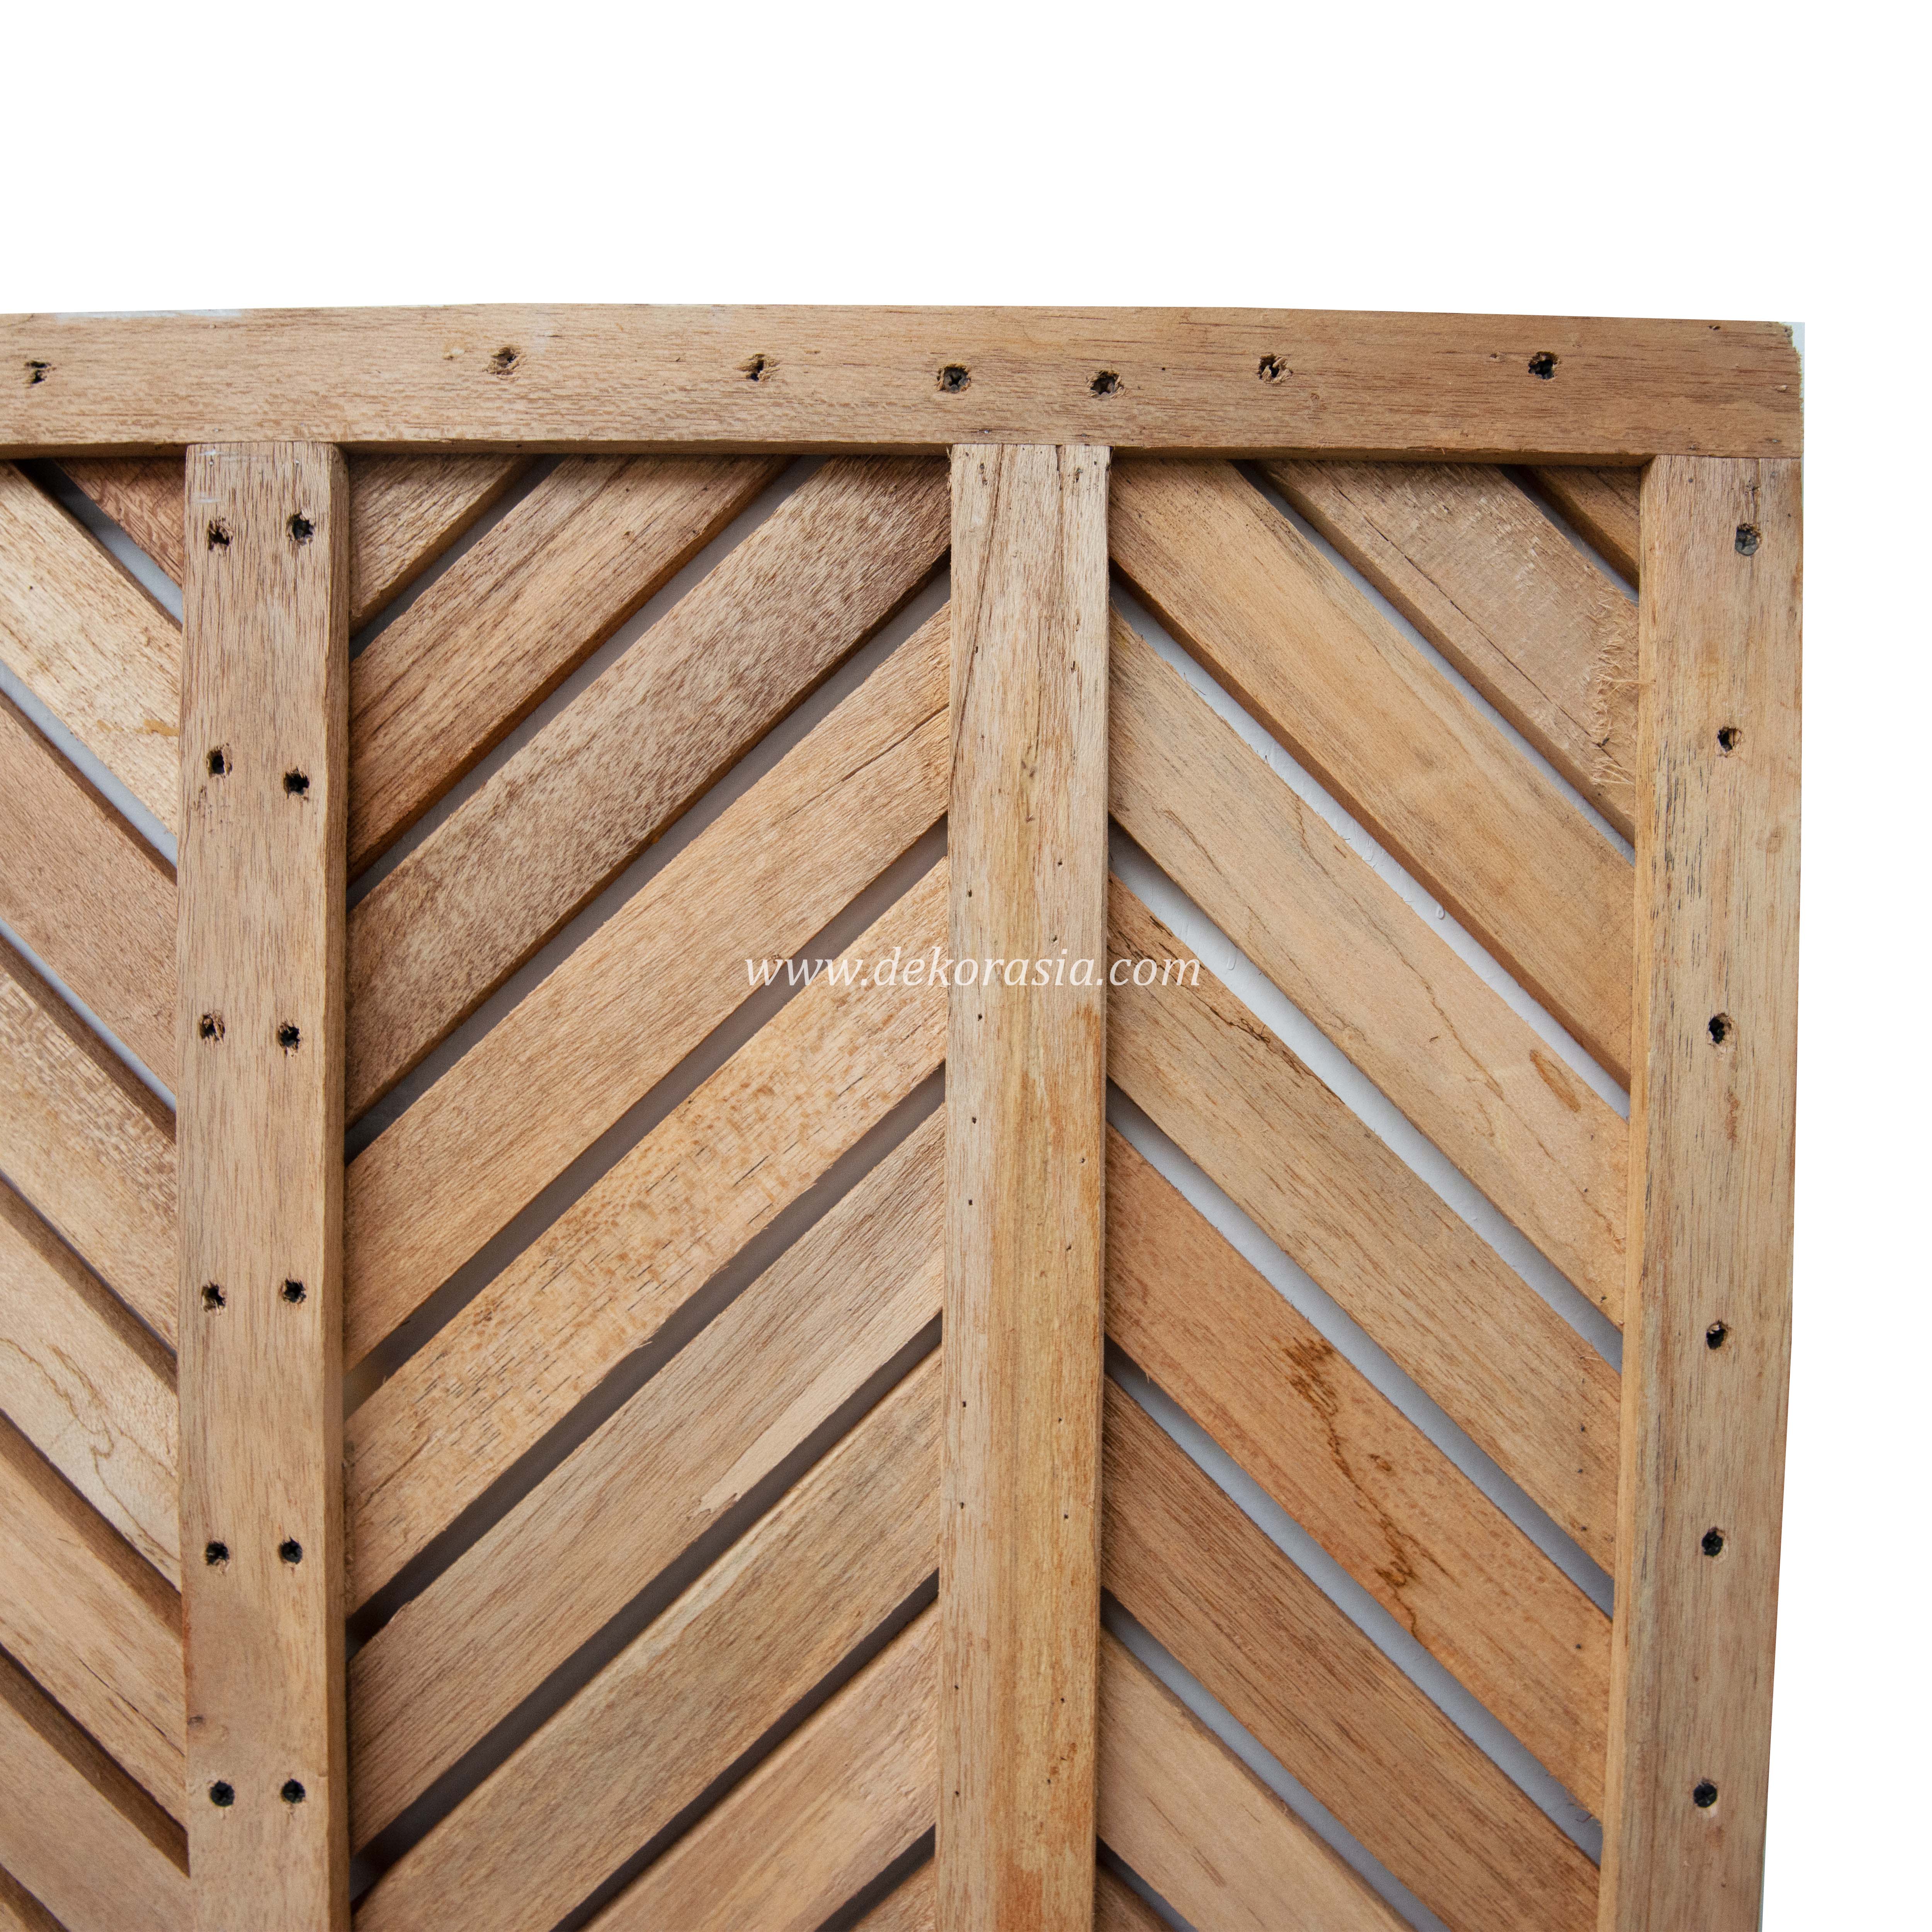 High Quality Wood Screen Kruing, Wood Panels Wave Pattern Design - Wood Fence Kruing for Indoor & Outdoor